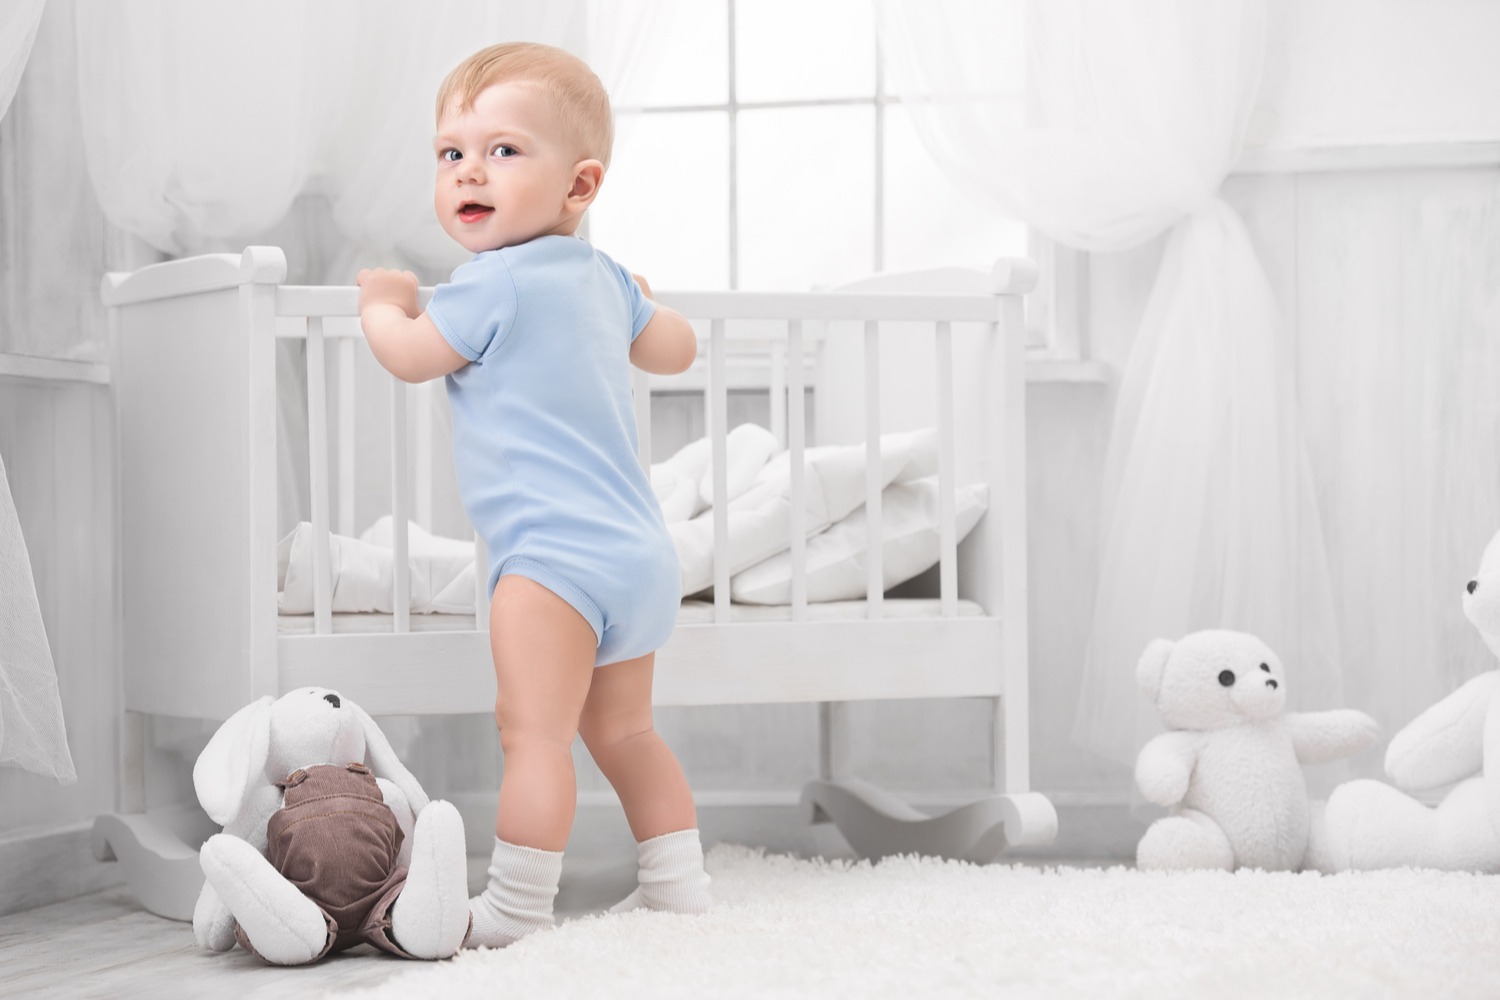 Top 5 Ways to Encourage Your Baby to Walk Without Support